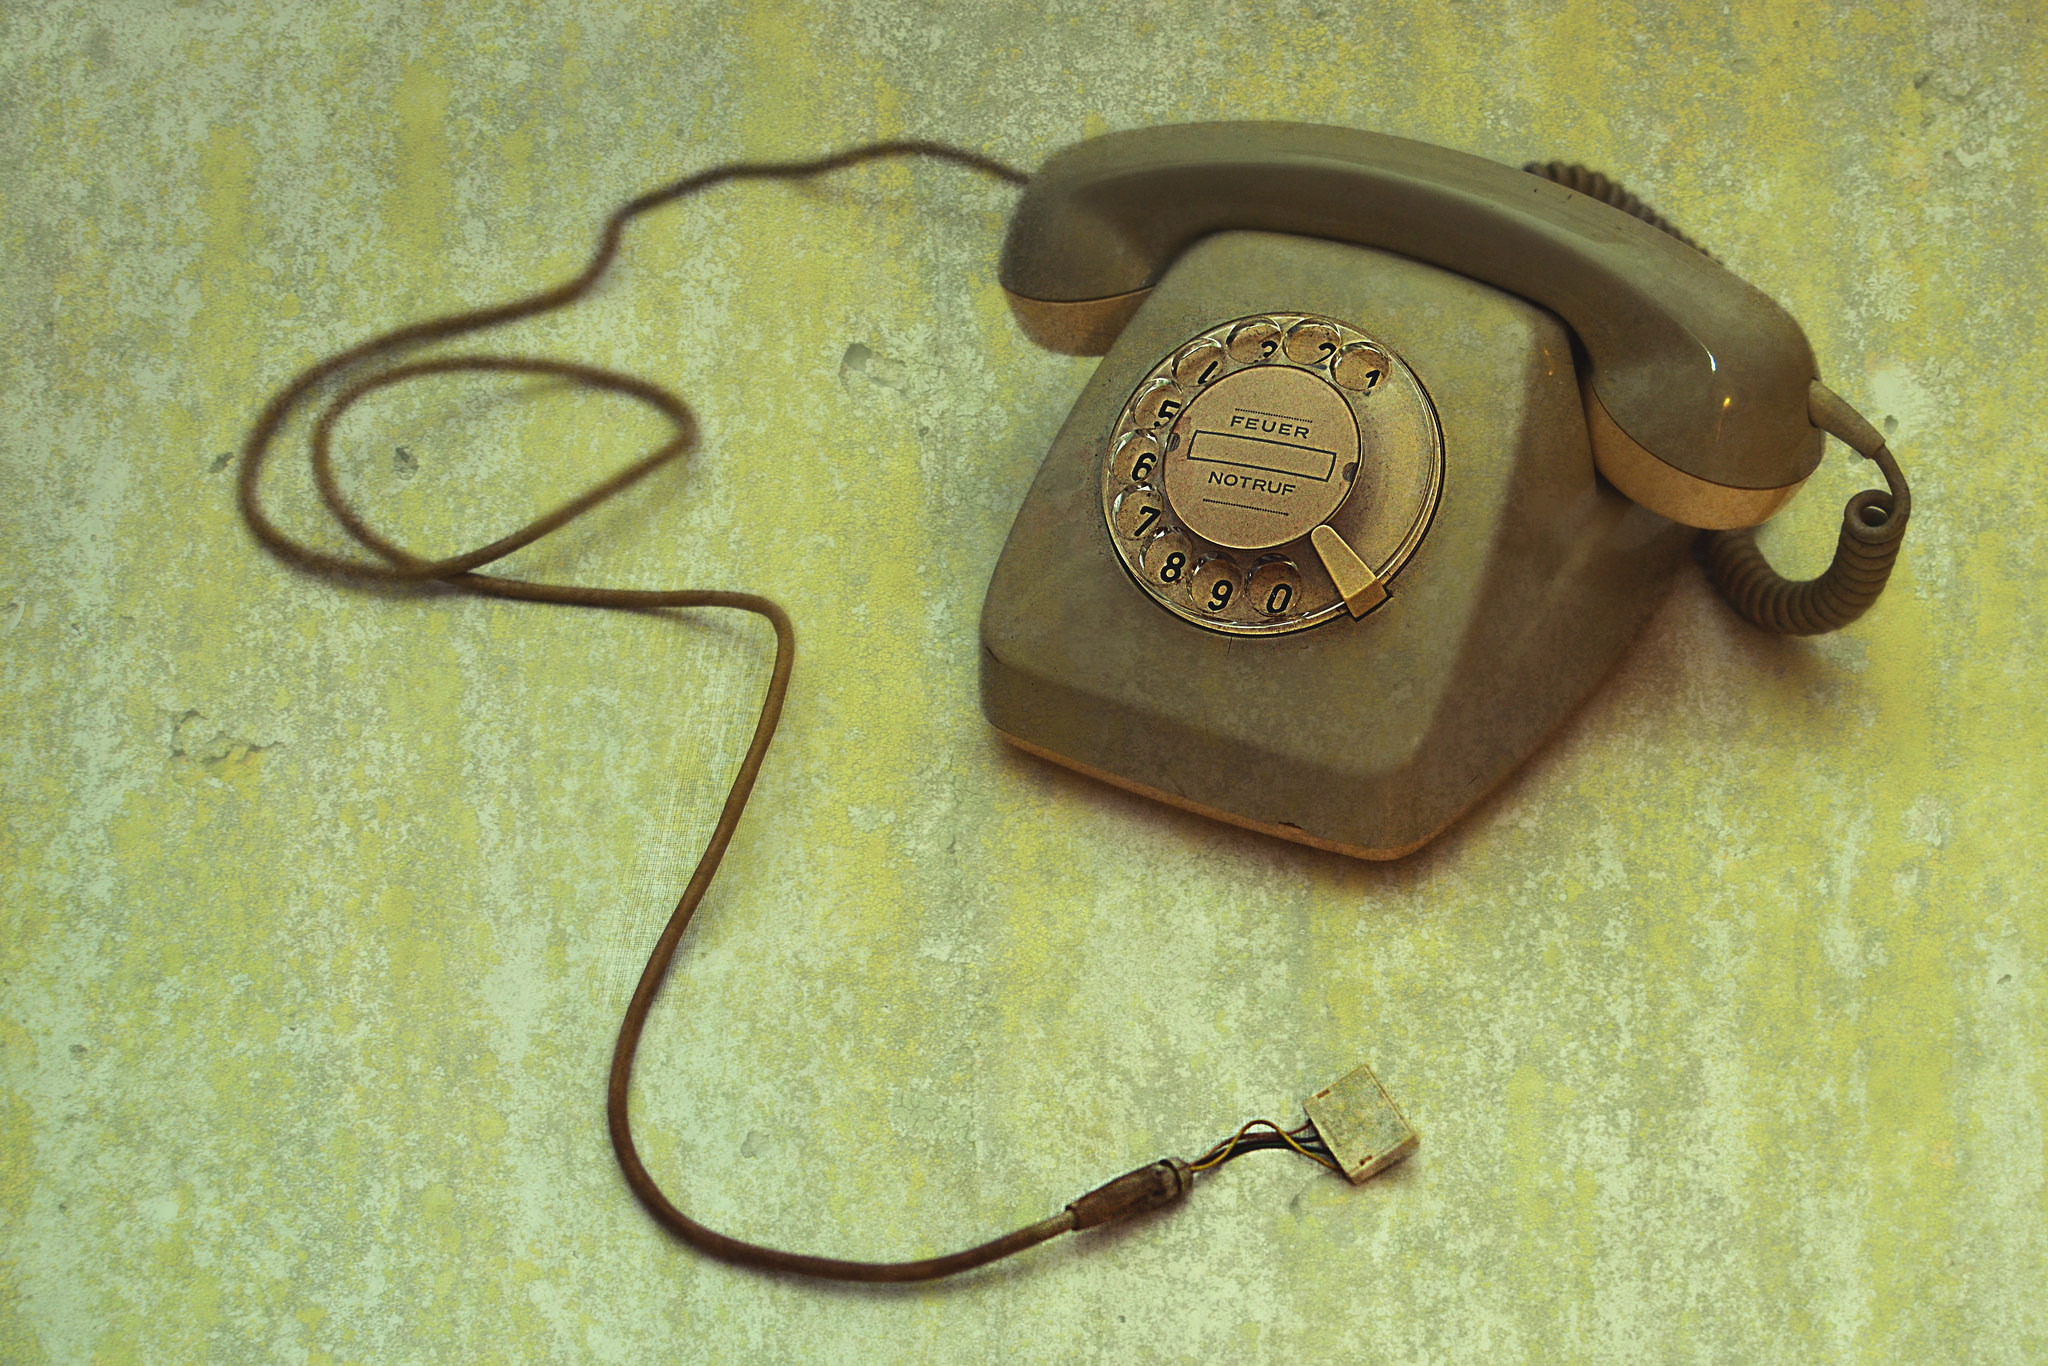 A dusty 1960s phone with cable disonnected